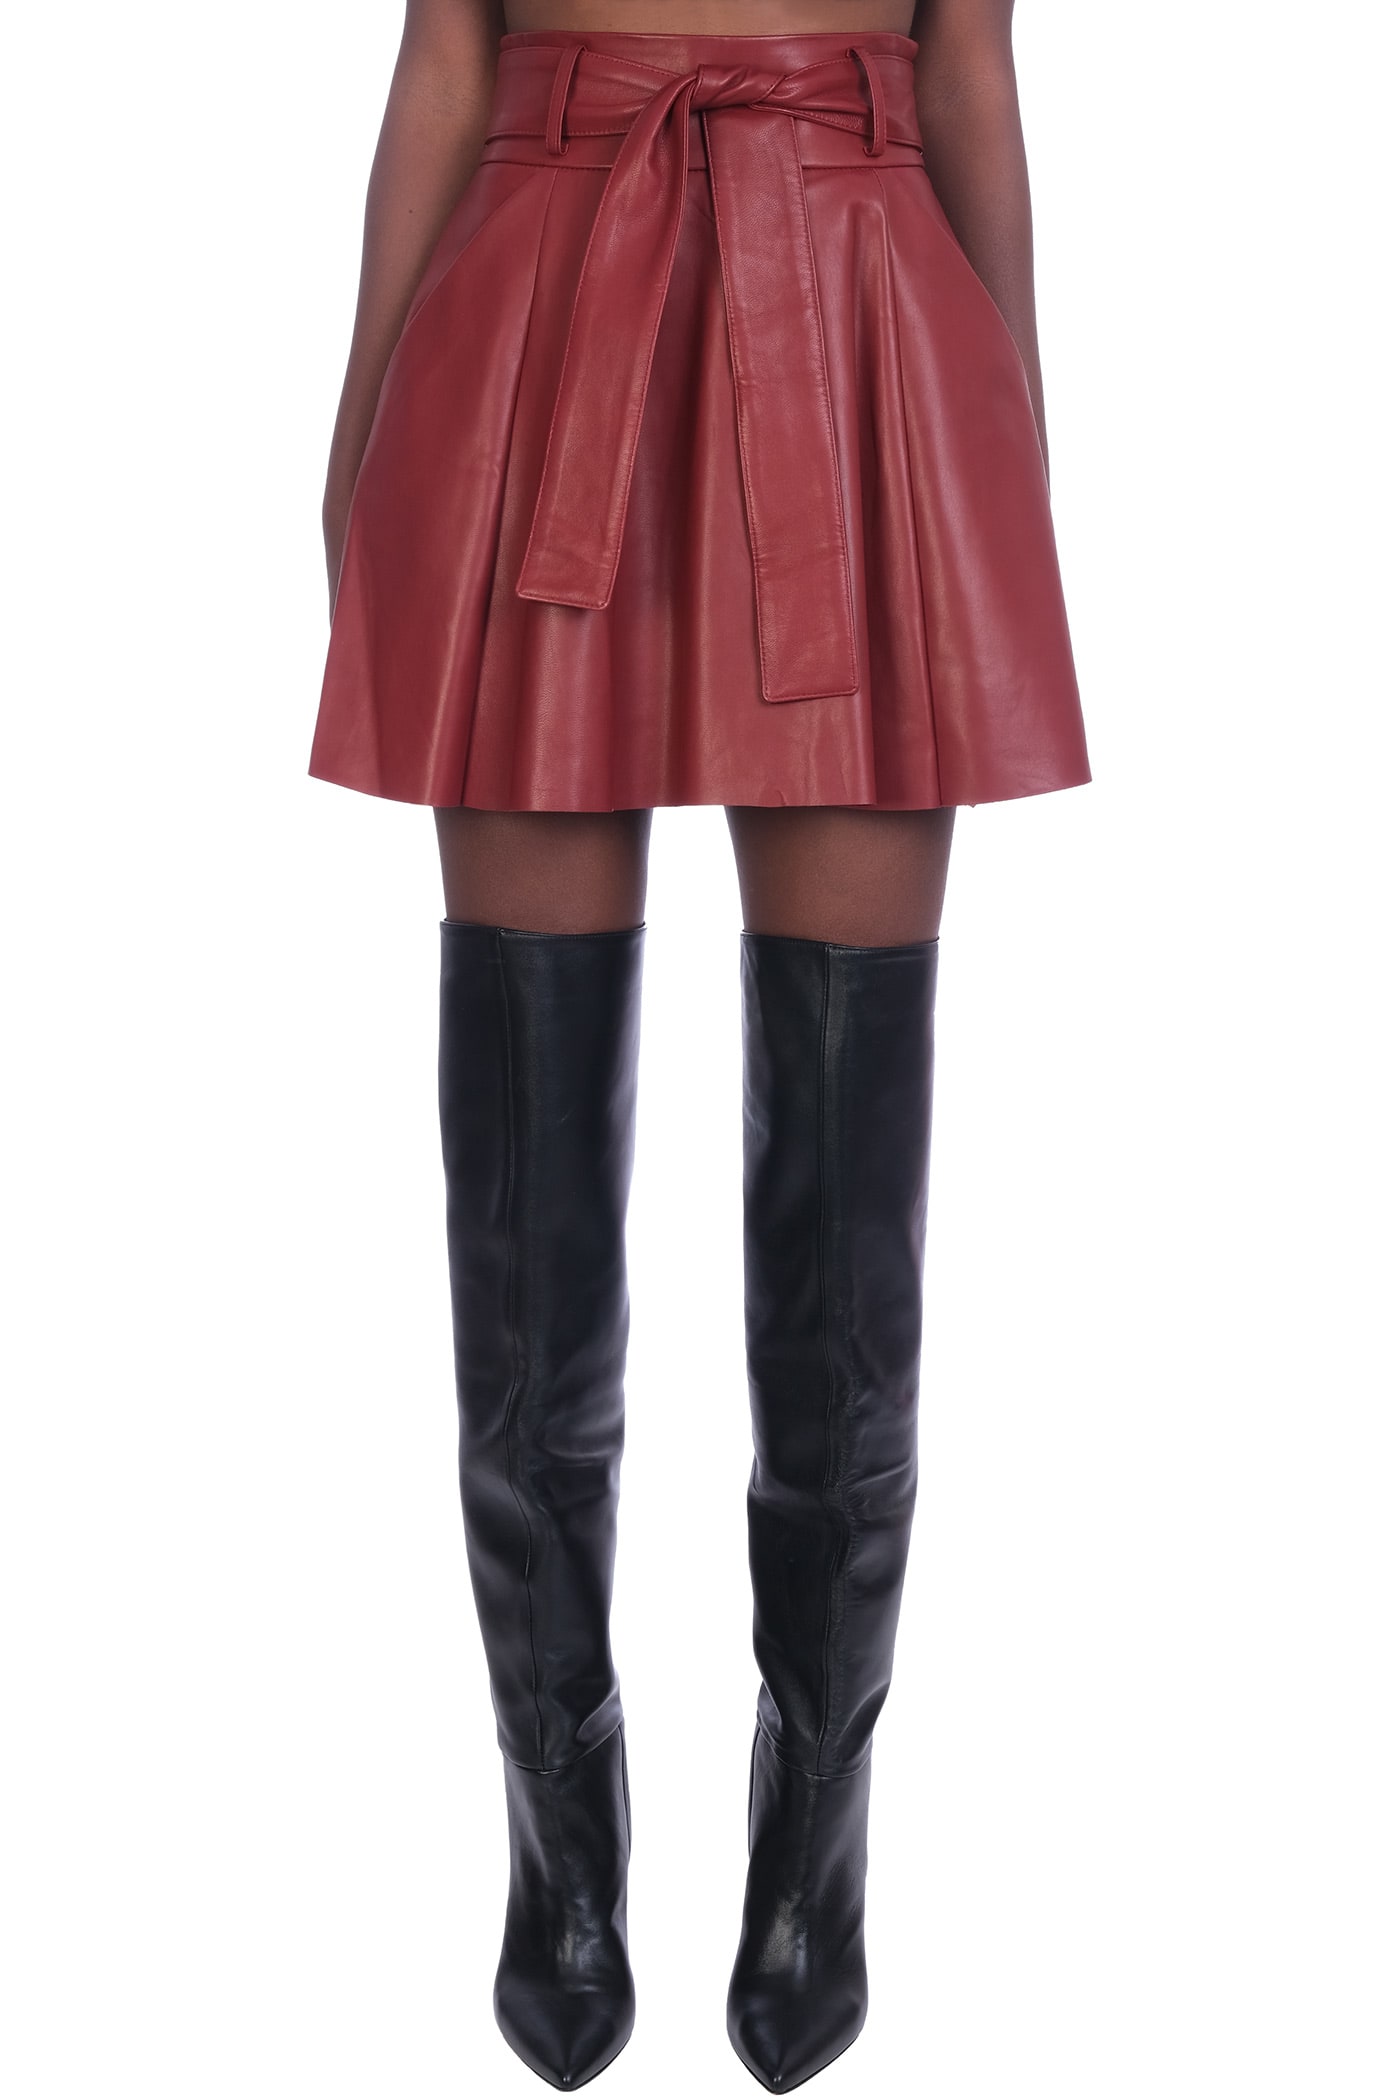 DROMe Skirt In Bordeaux Leather